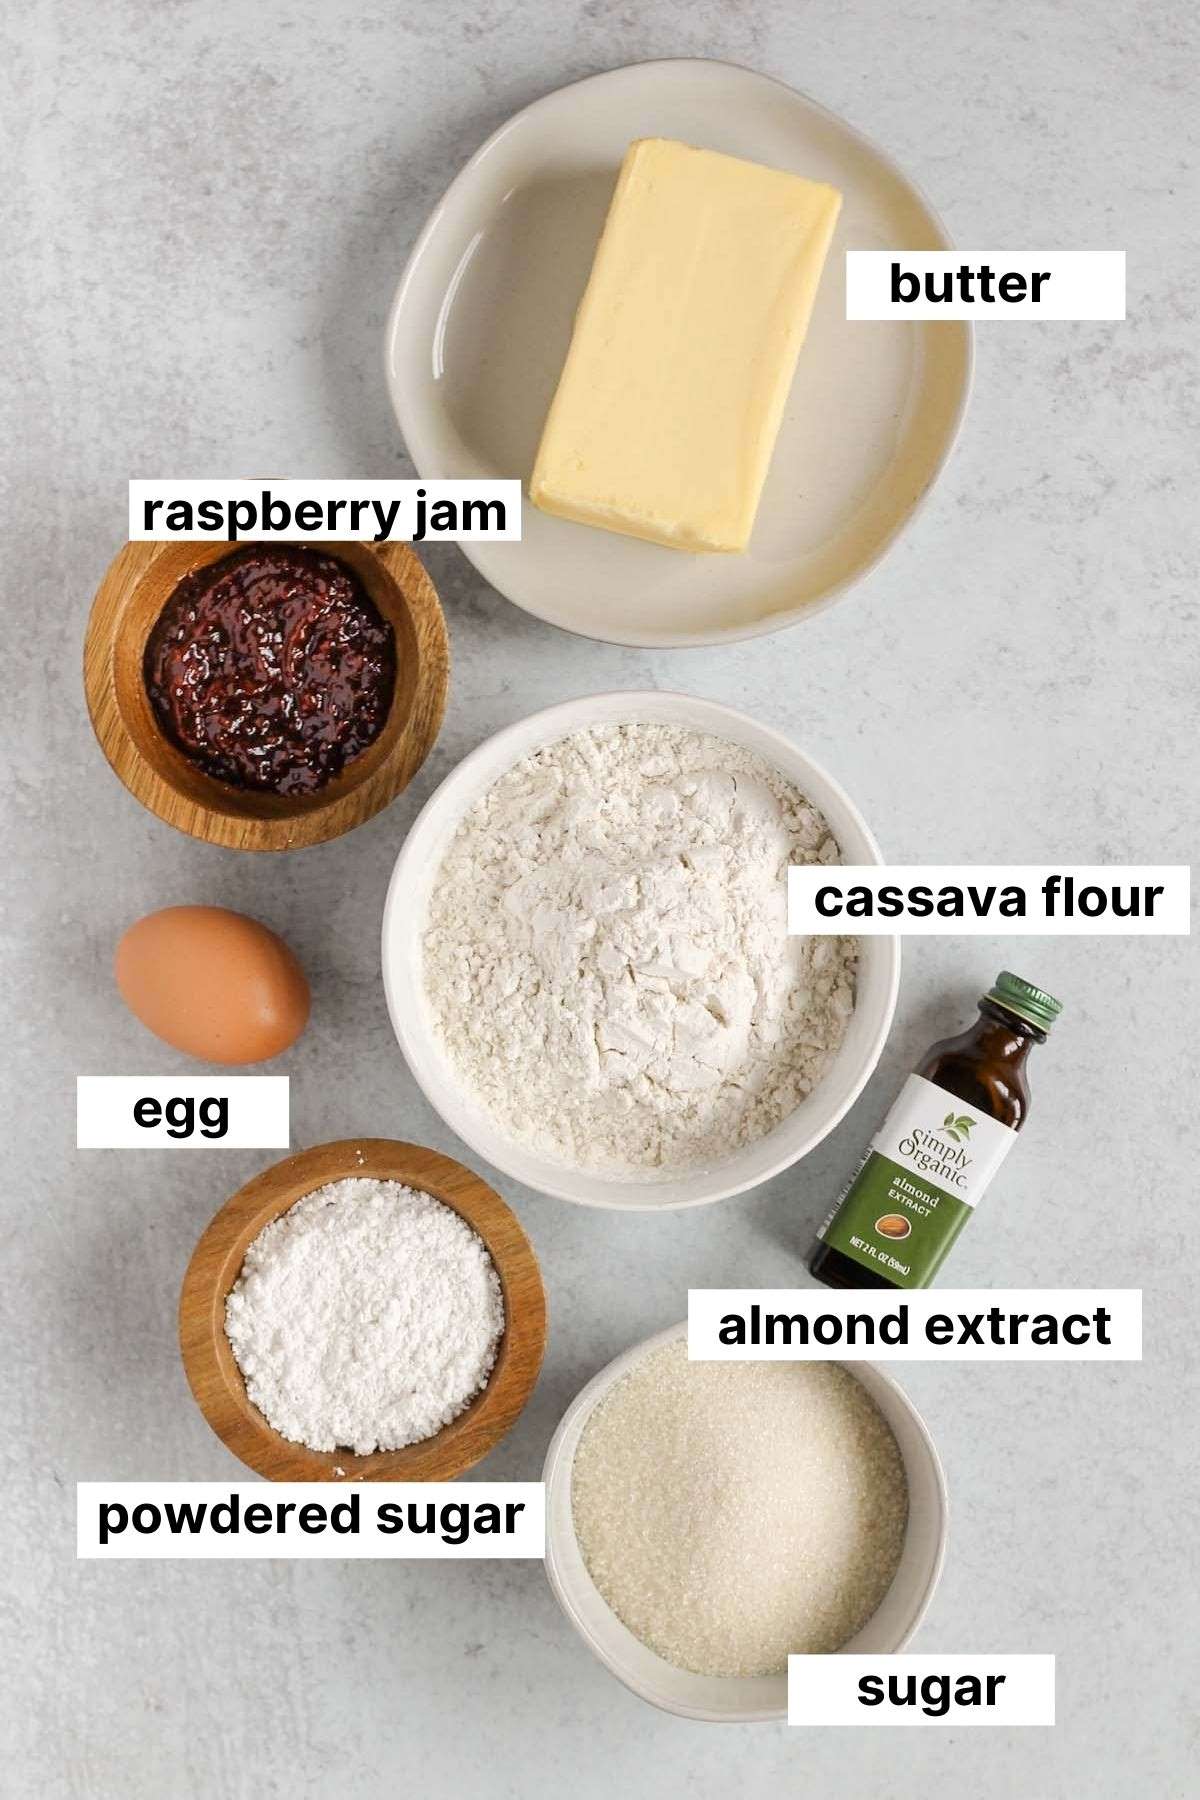 Labeled ingredients used in gluten-free thumbprint cookies.